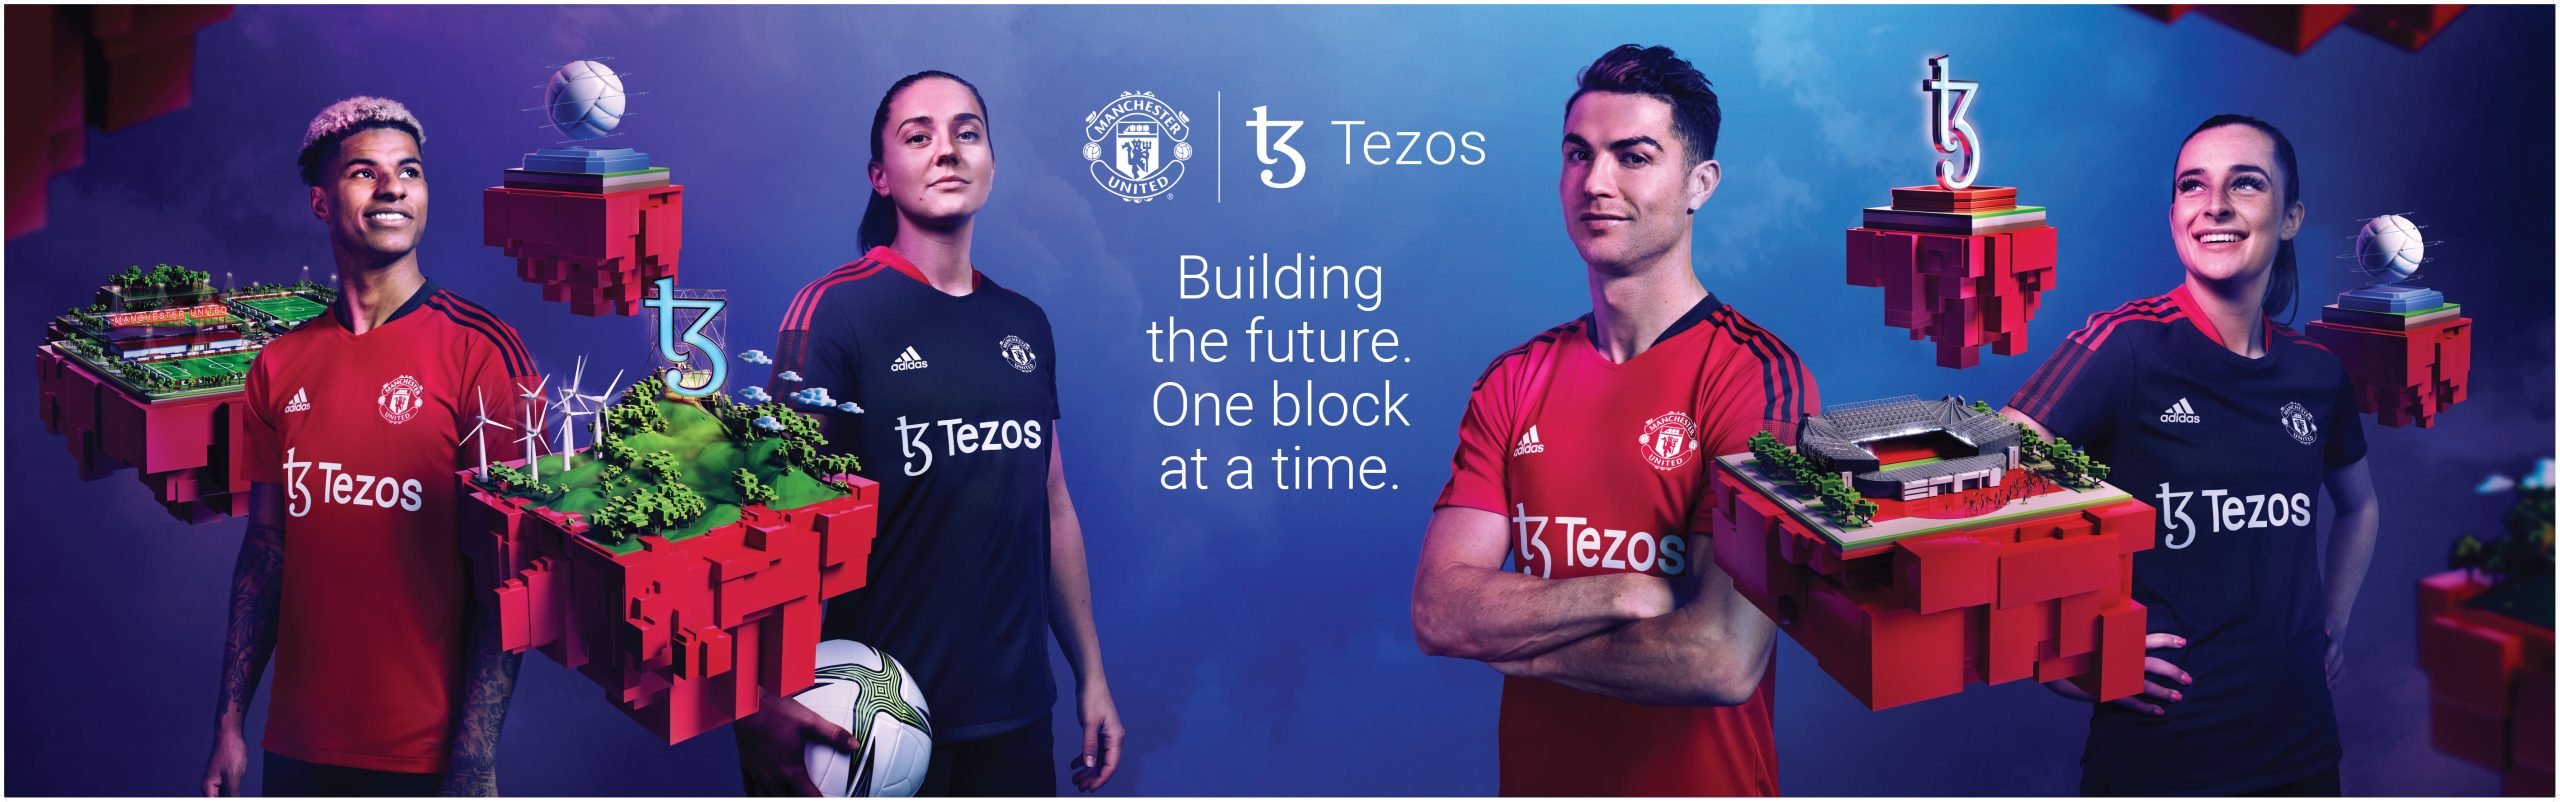 Manchester United Tezos banner featuring famous footballers Cristiano Ronaldo and 